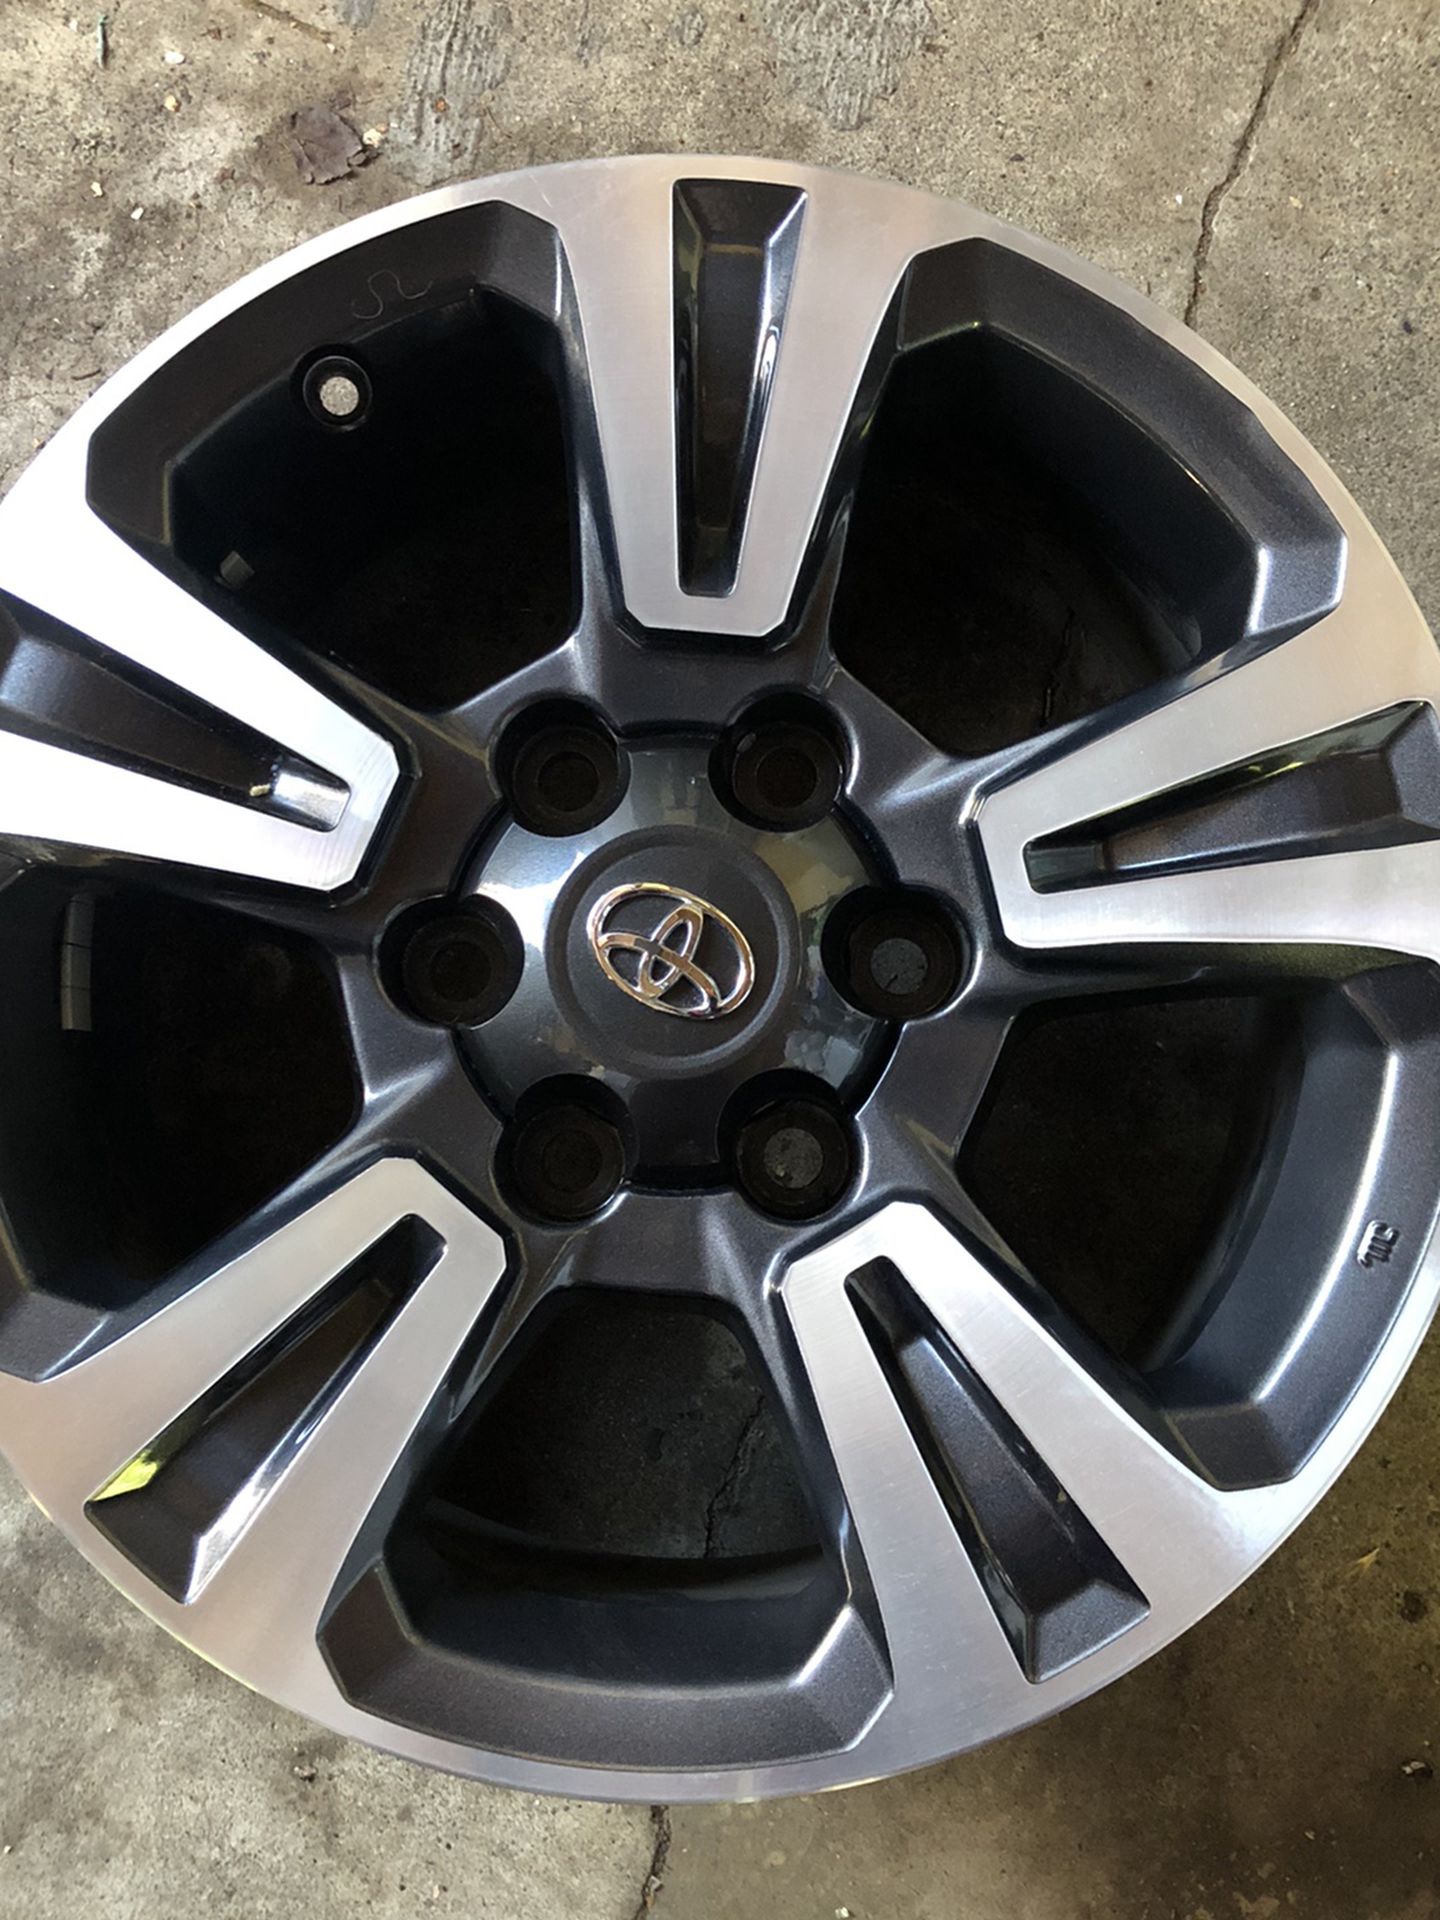 4 RIMS TOYOTA SIZE 17 INCHES TRD STOCK  THEY FIT TACOMA SEQUOIA 4RUNNER  6 LUGS GREAT CONDITION AND GREAT SHAPE  9/10 